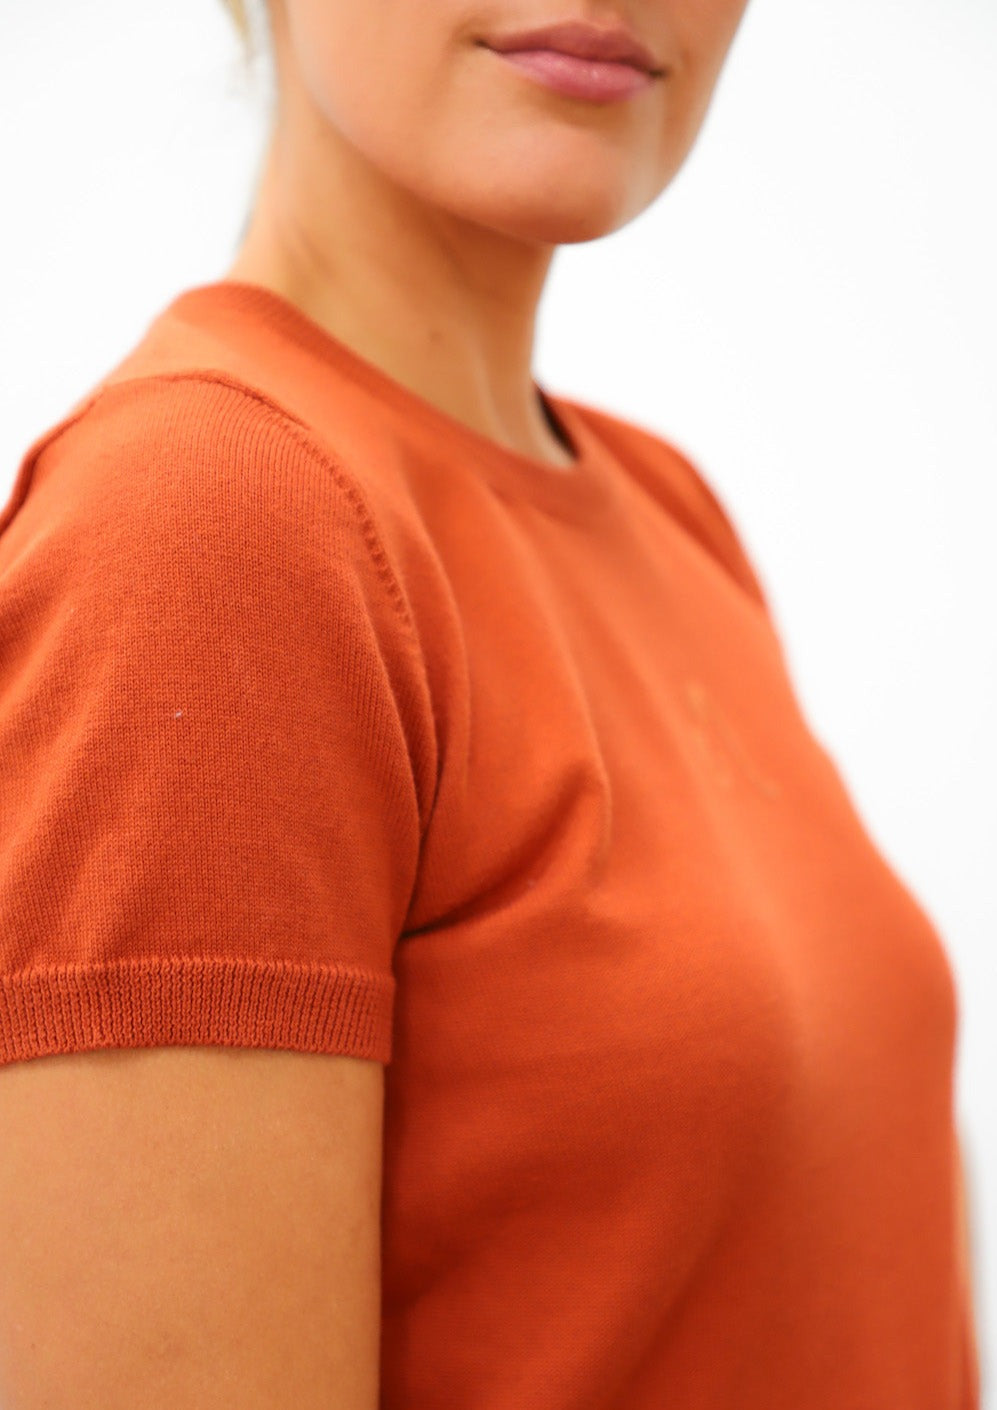 Dooz orange leo knit sweater short sleeve detail with ribbing made in los angeles usa